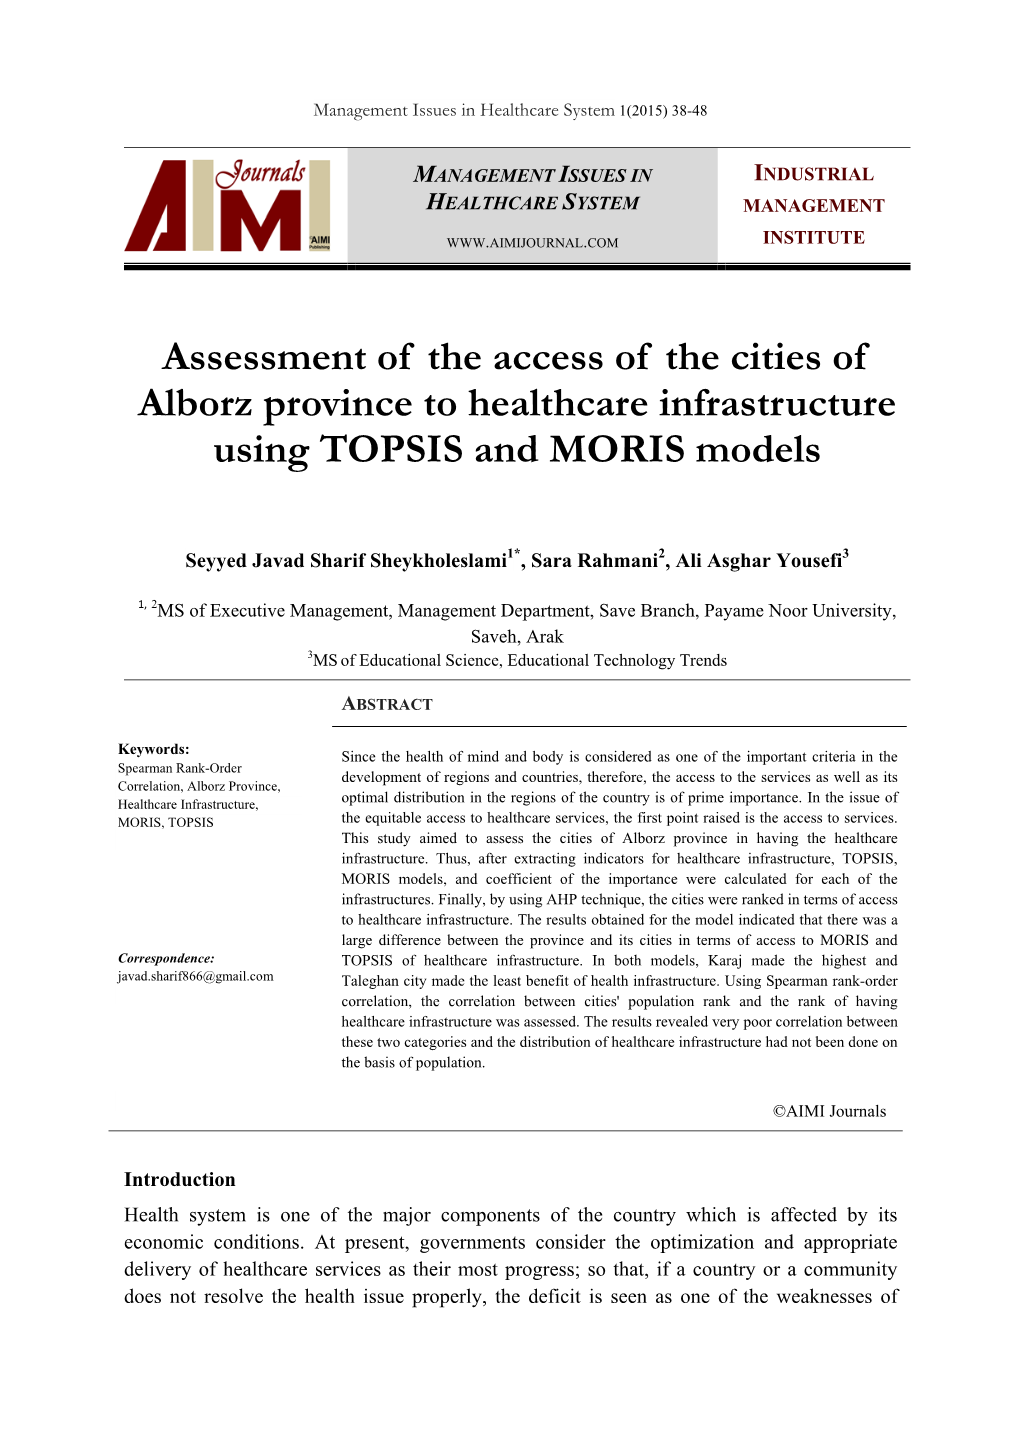 Assessment of the Access of the Cities of Alborz Province to Healthcare Infrastructure Using TOPSIS and MORIS Models